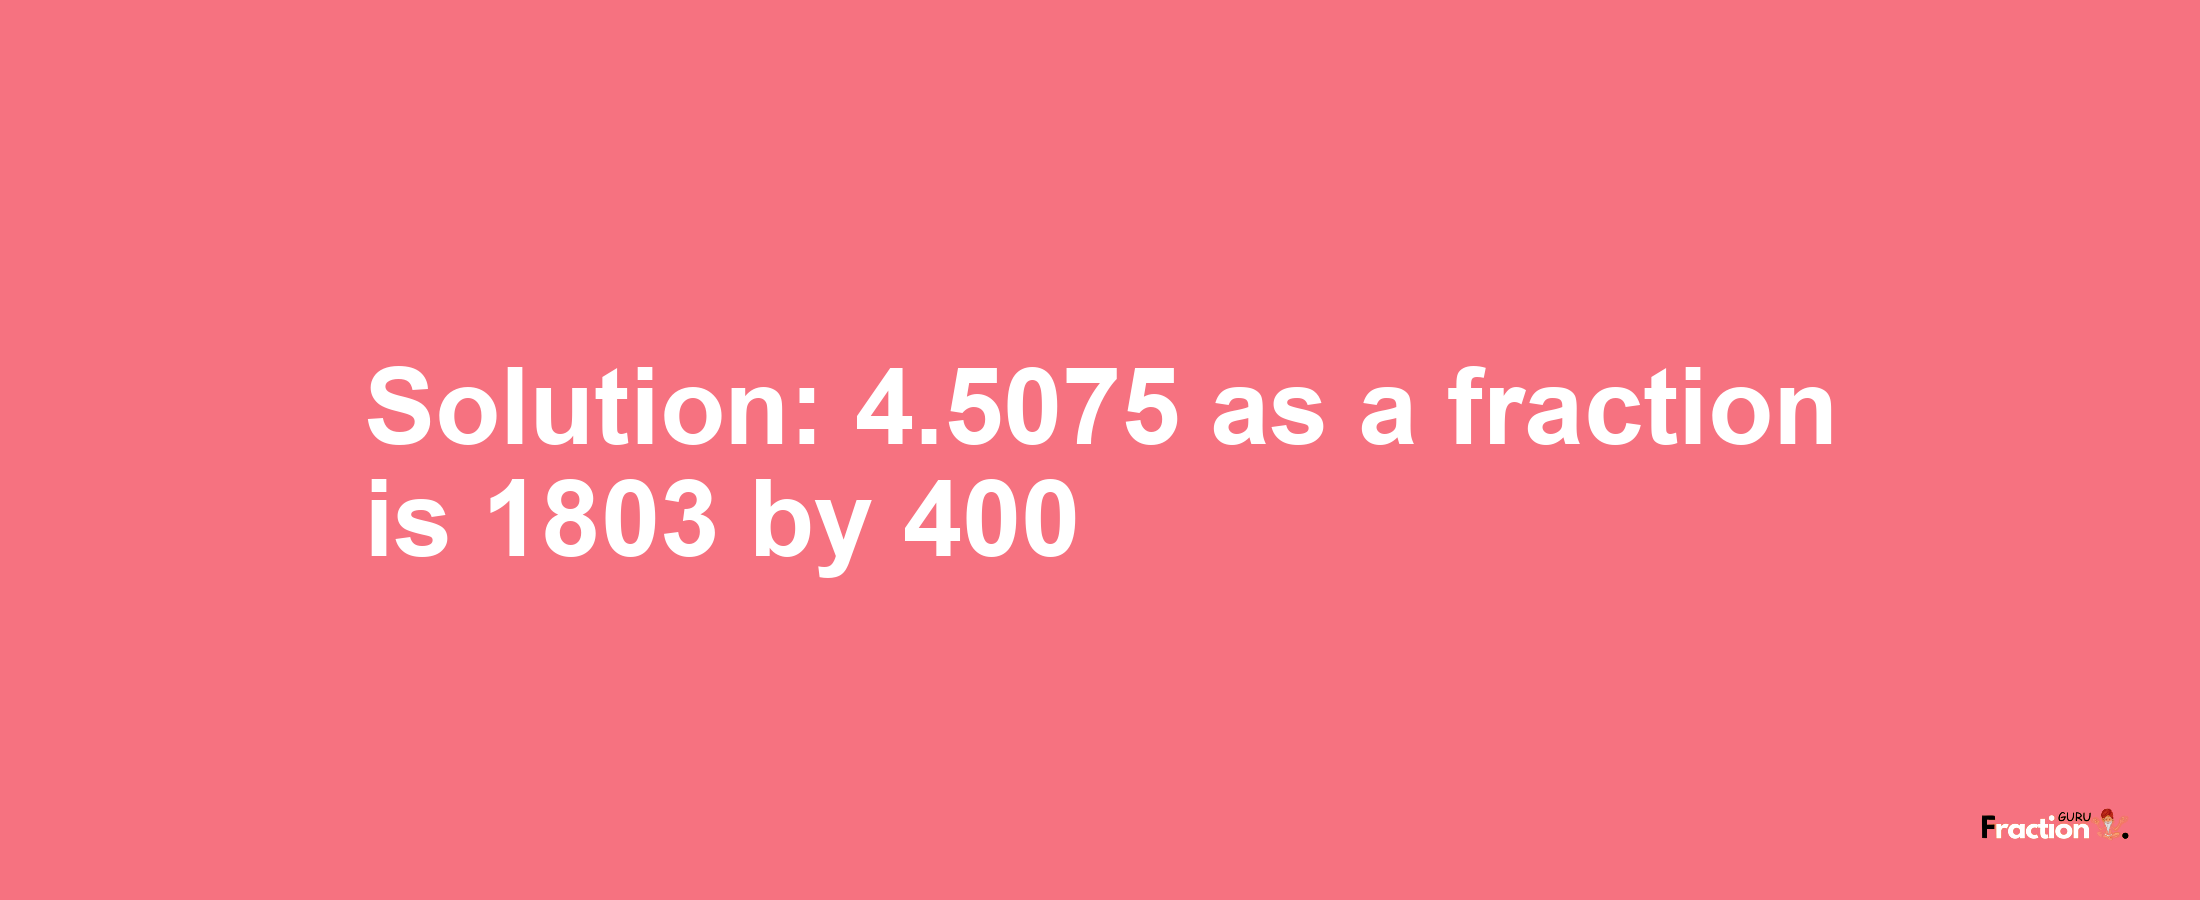 Solution:4.5075 as a fraction is 1803/400